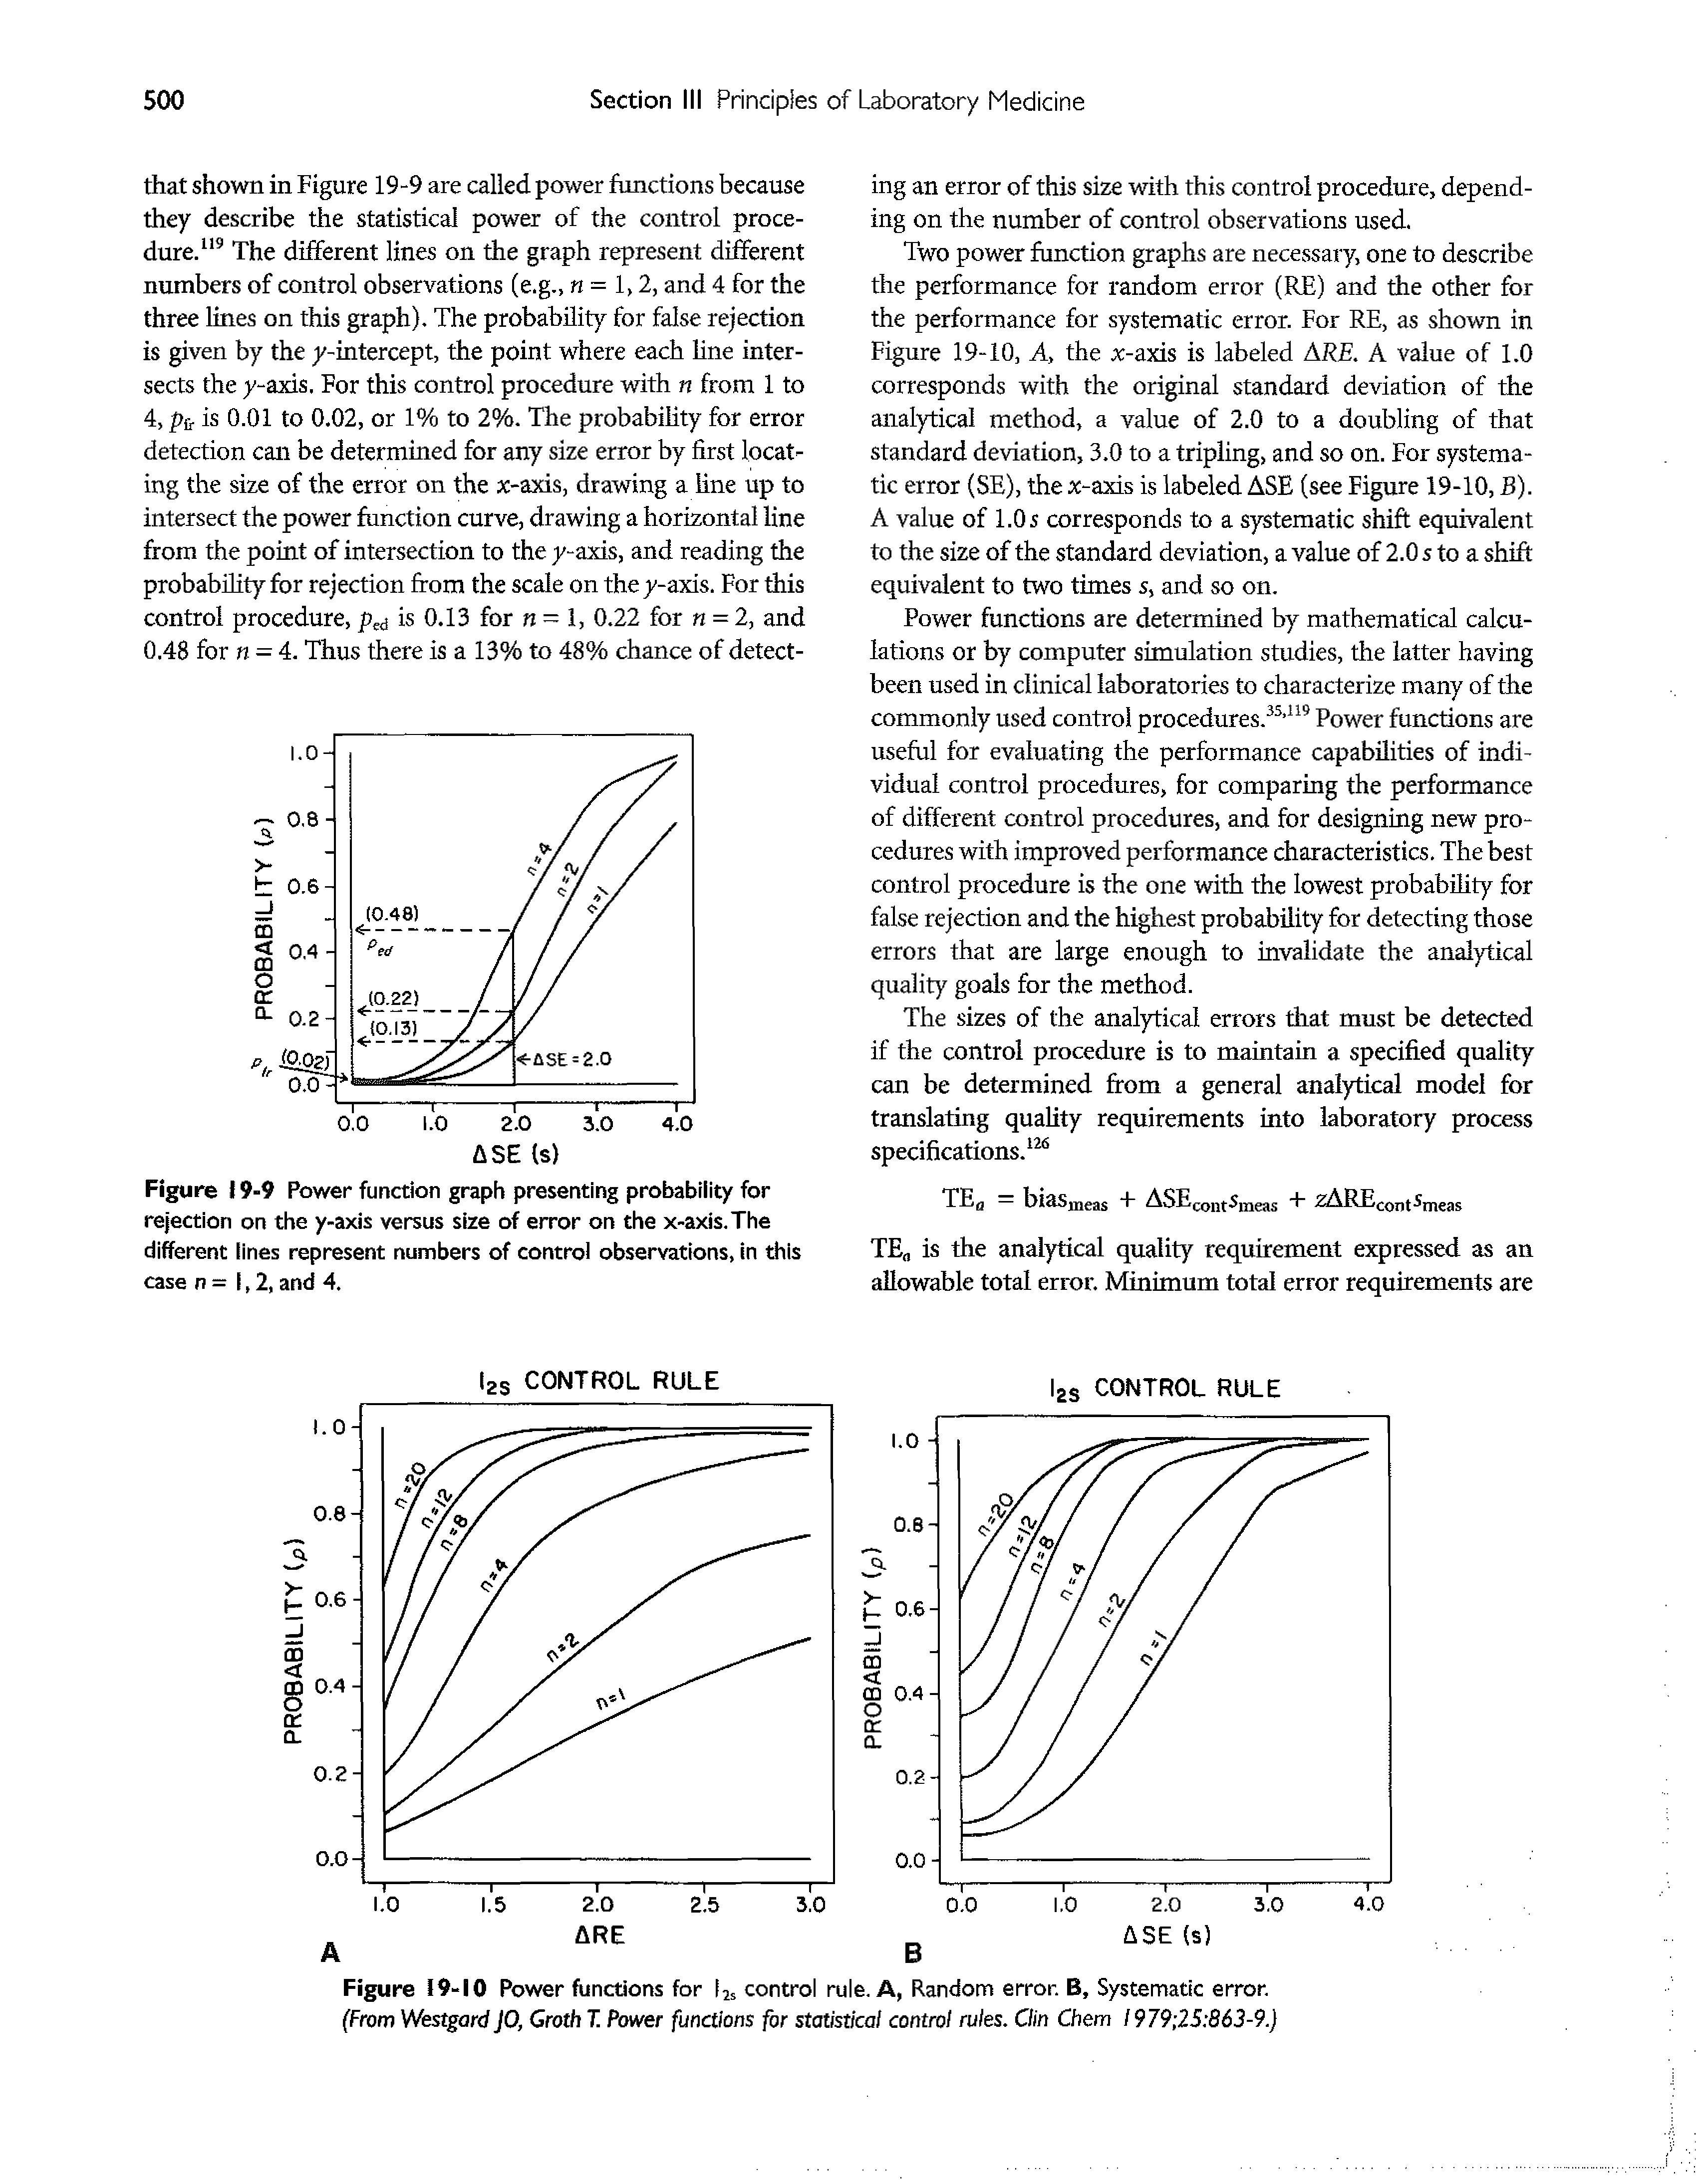 Figure 19-10 Power functions for l2s control rule. A, Random error. B, Systematic error. (From Westgard JO, Groth T. Power functions for statistical control rules. Clin Chem 1979 25 863-9.)...